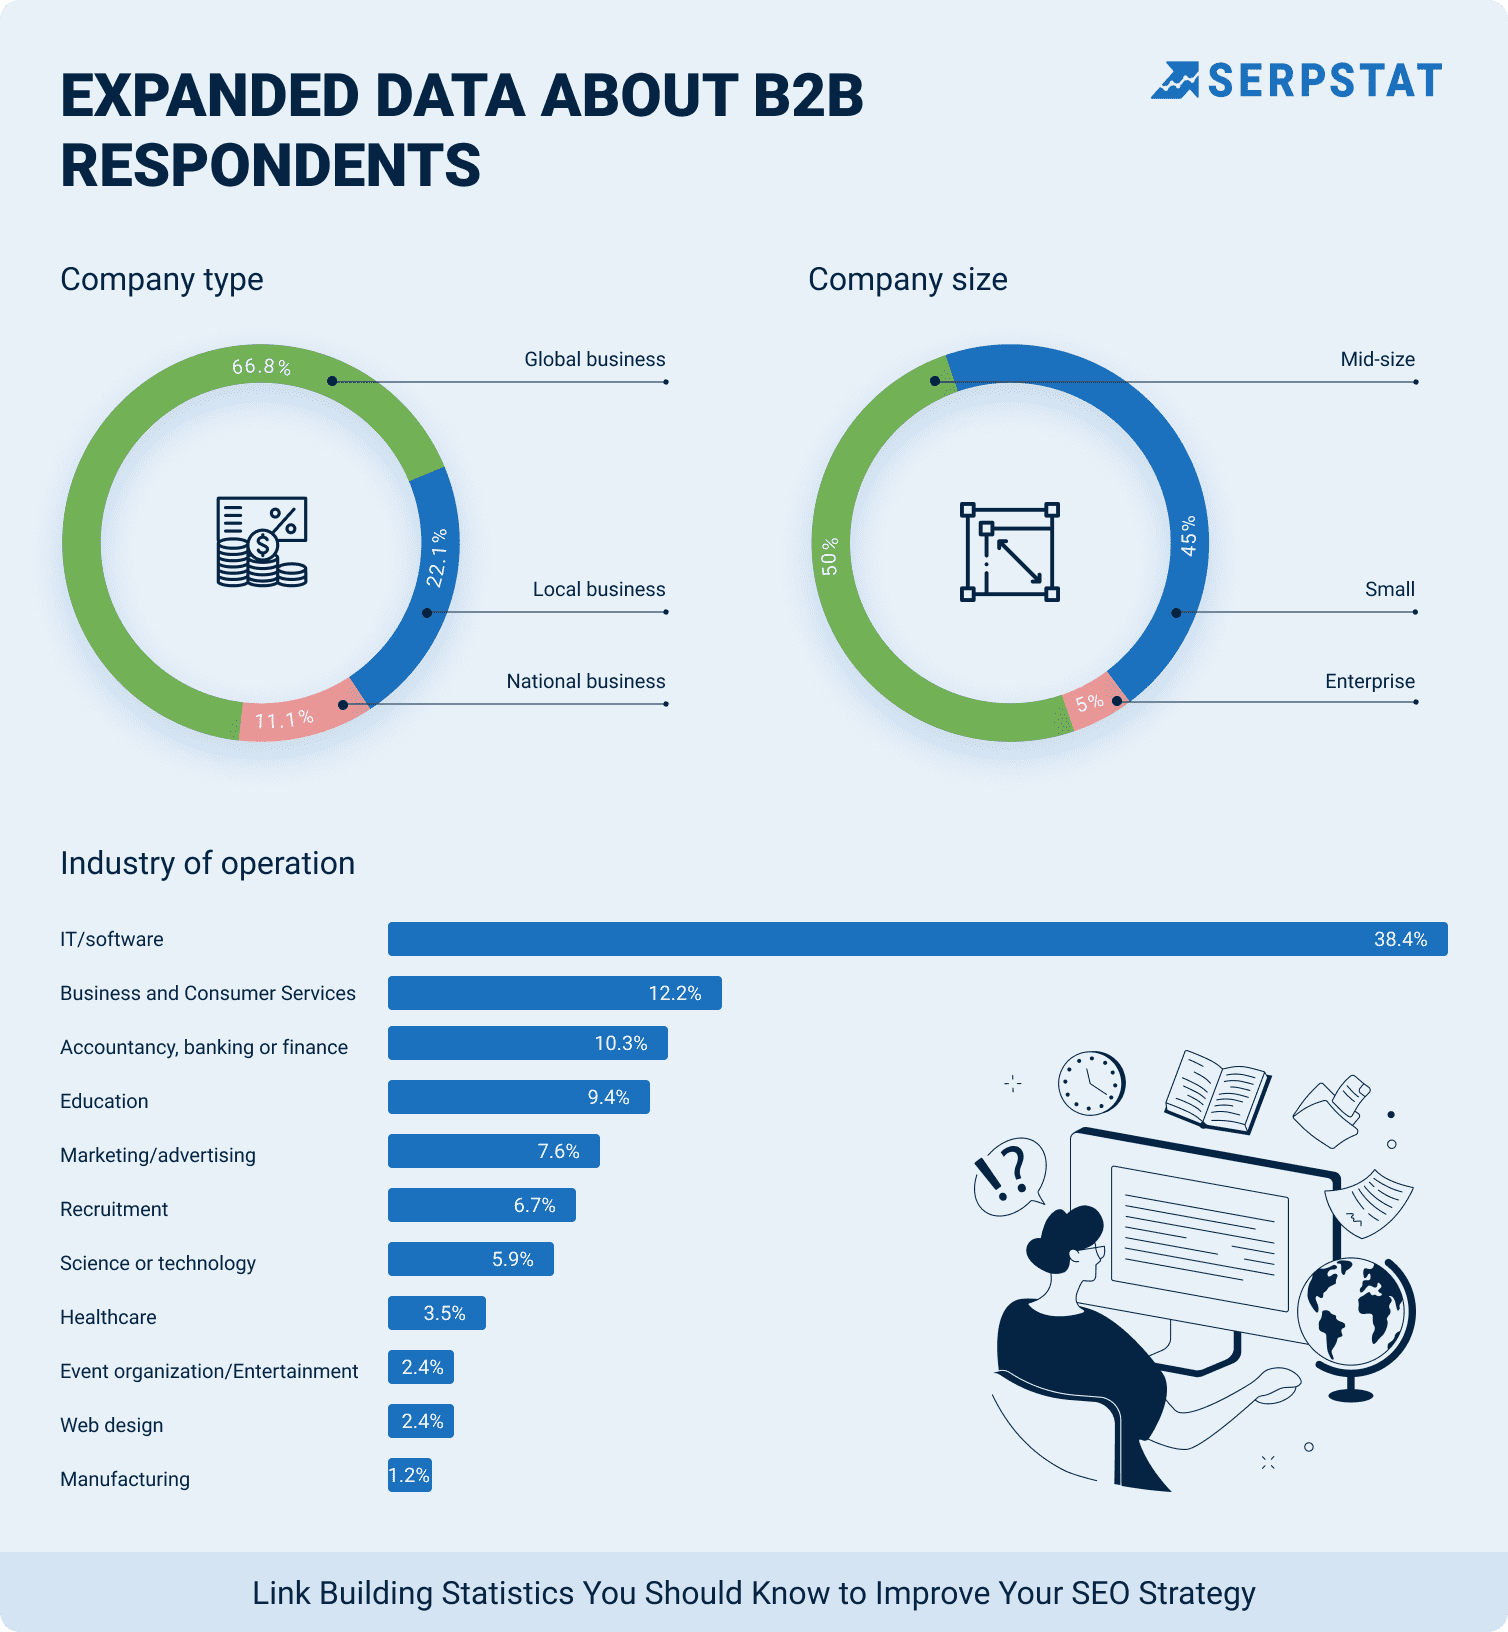 Expanded data about B2B respondents